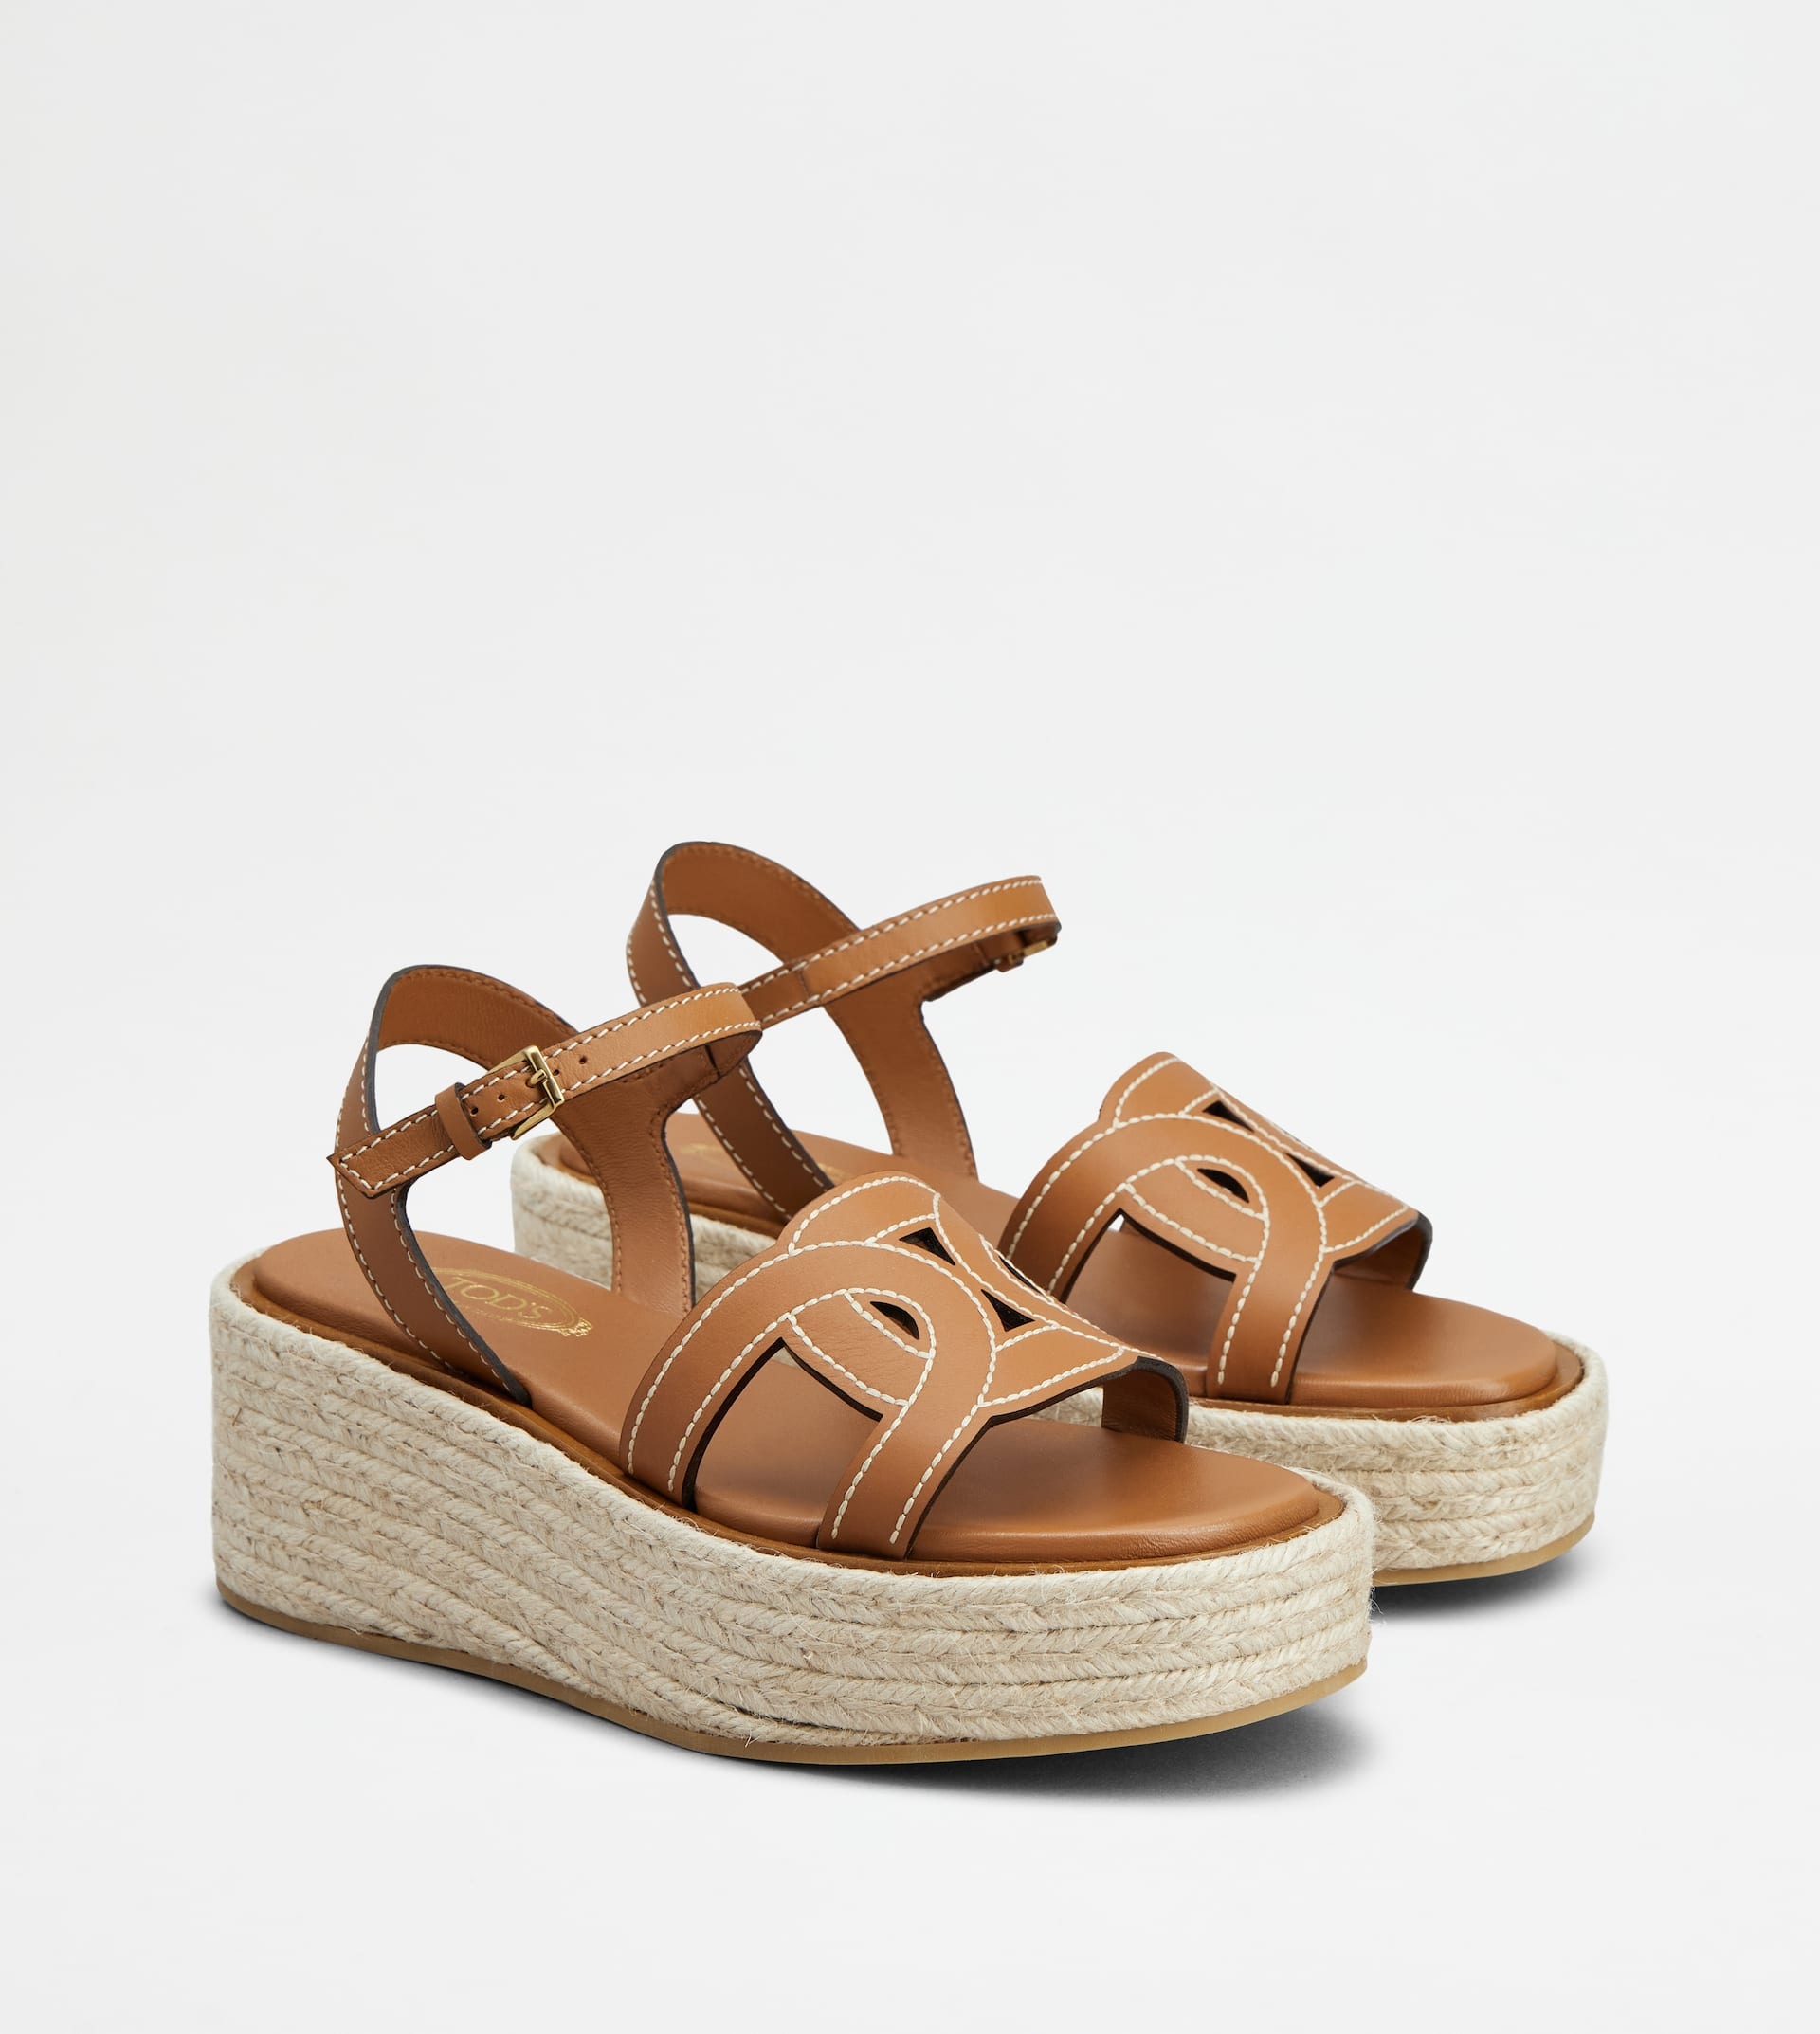 KATE WEDGE SANDALS IN LEATHER - BROWN - 3